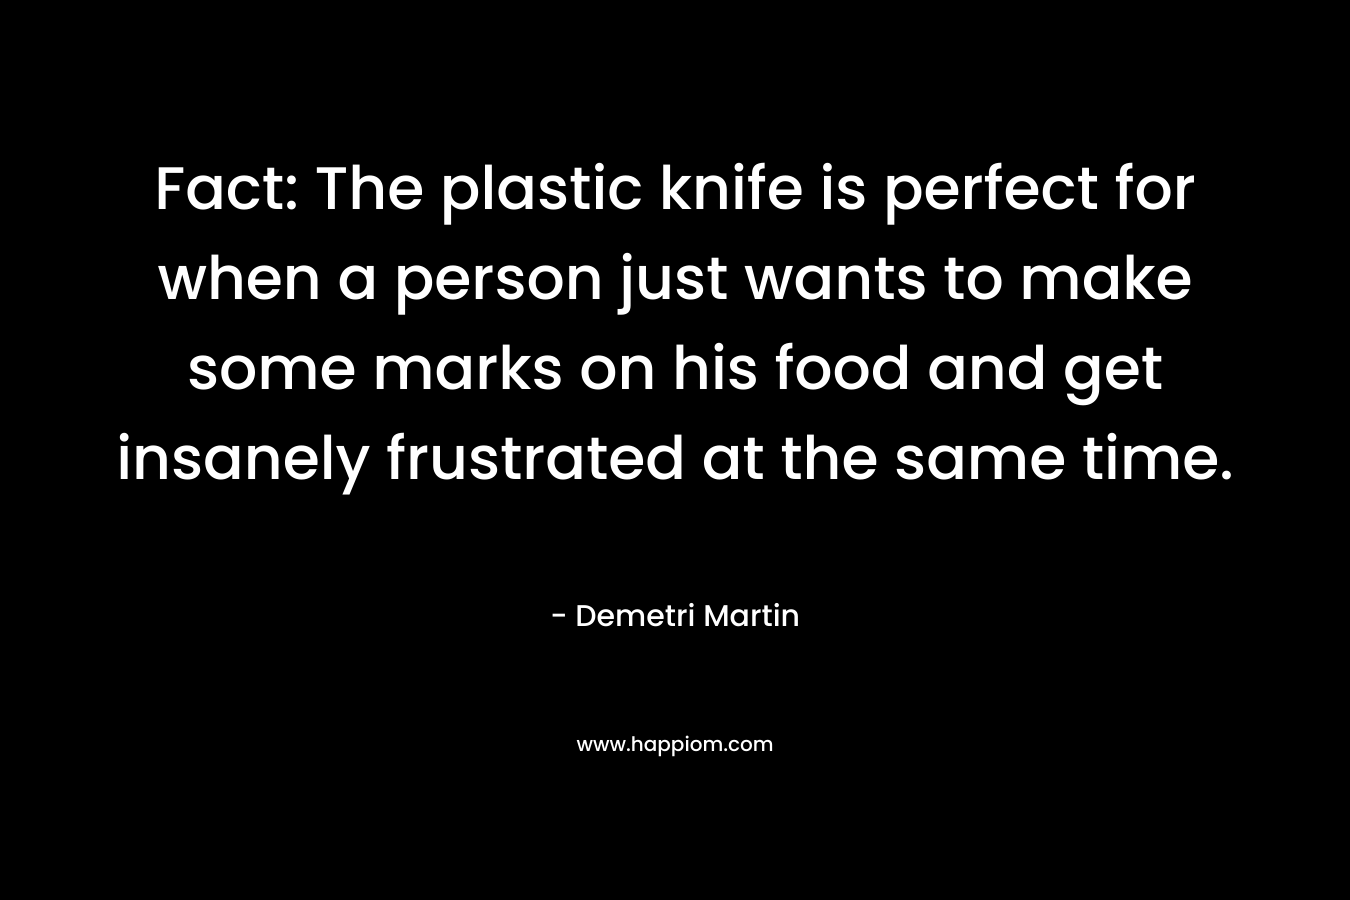 Fact: The plastic knife is perfect for when a person just wants to make some marks on his food and get insanely frustrated at the same time. – Demetri Martin